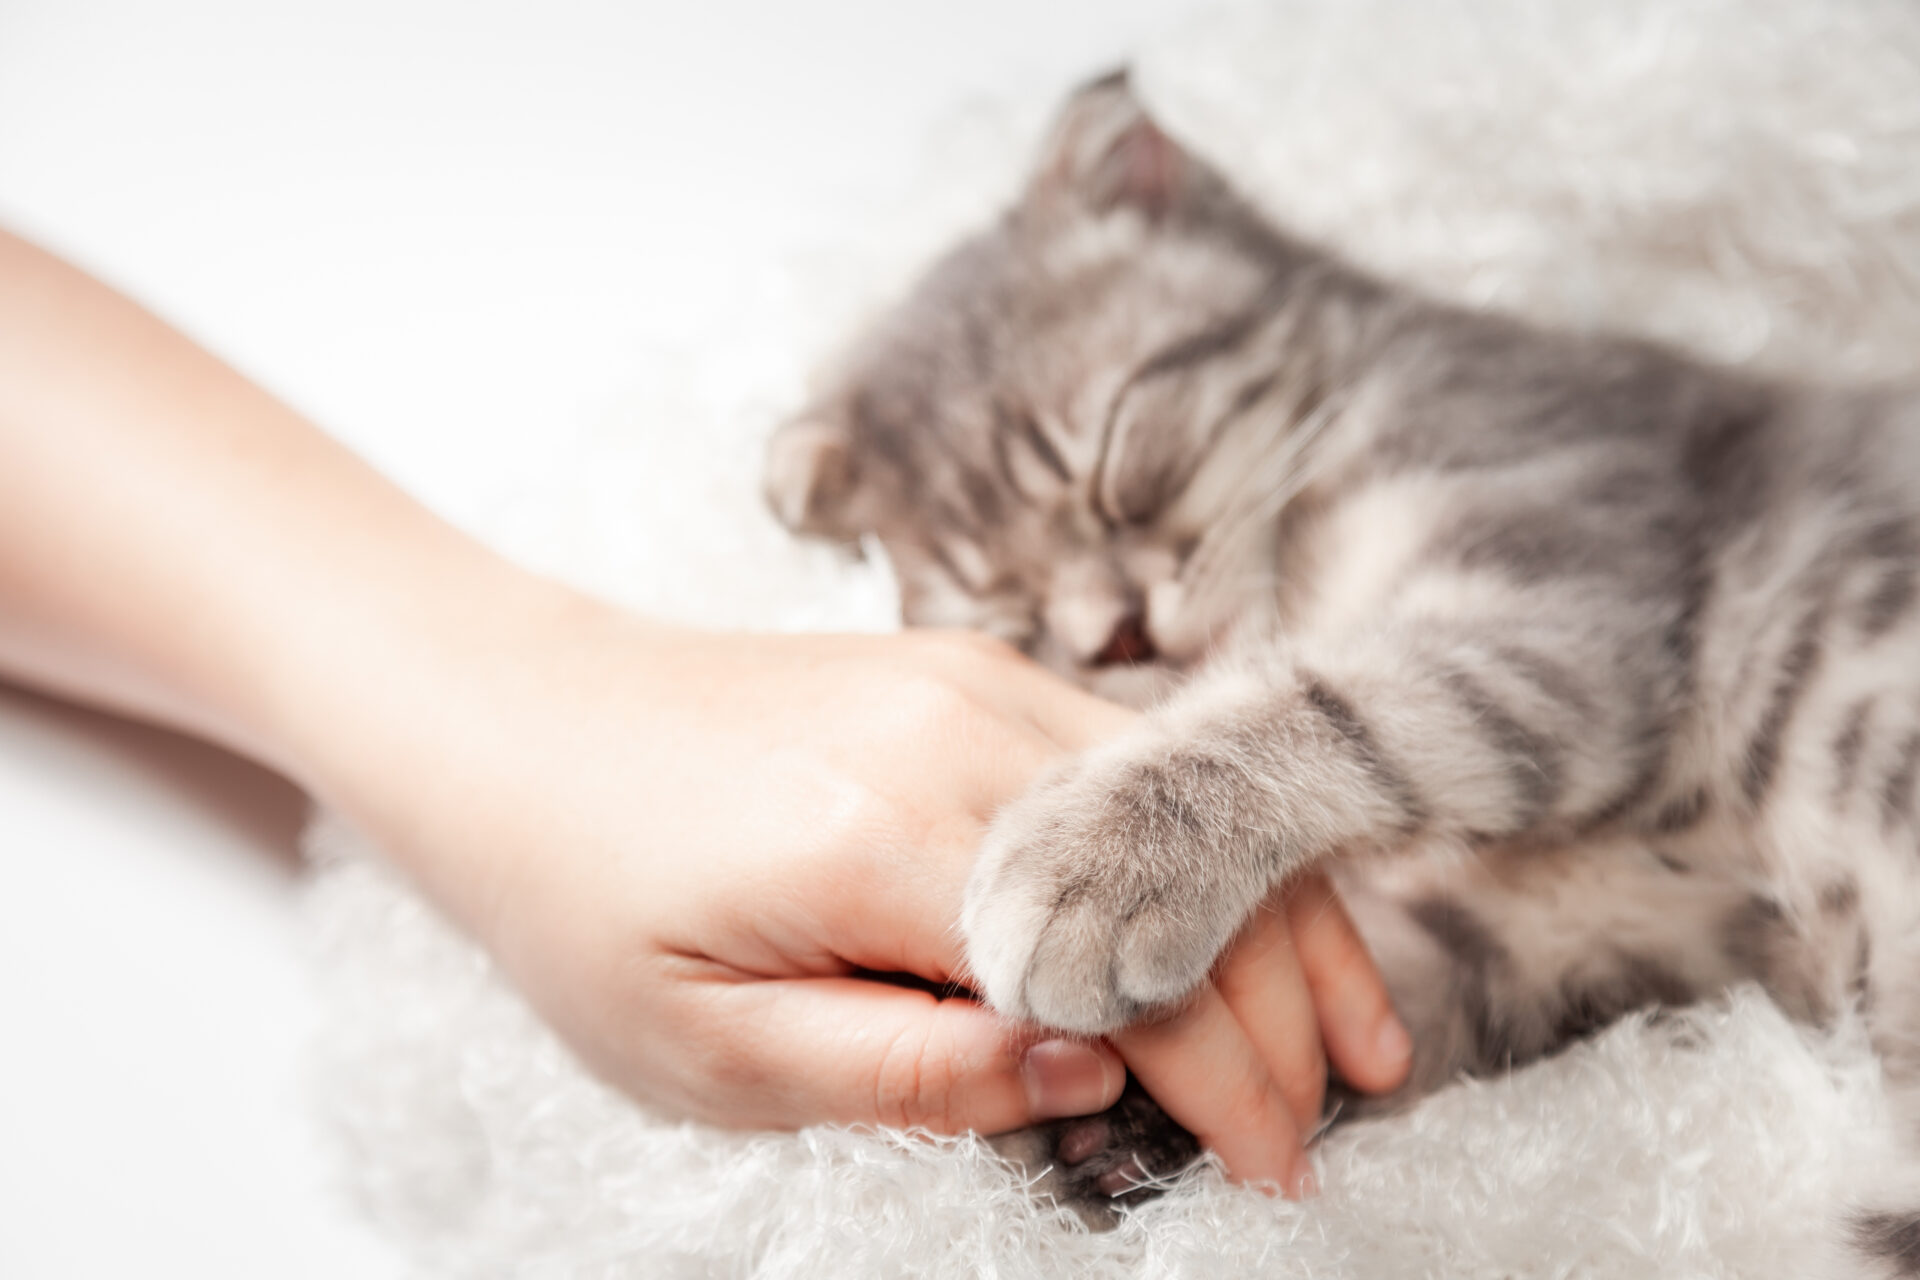 Cat love By the hand grip at hand. happy cat lovely comfortable